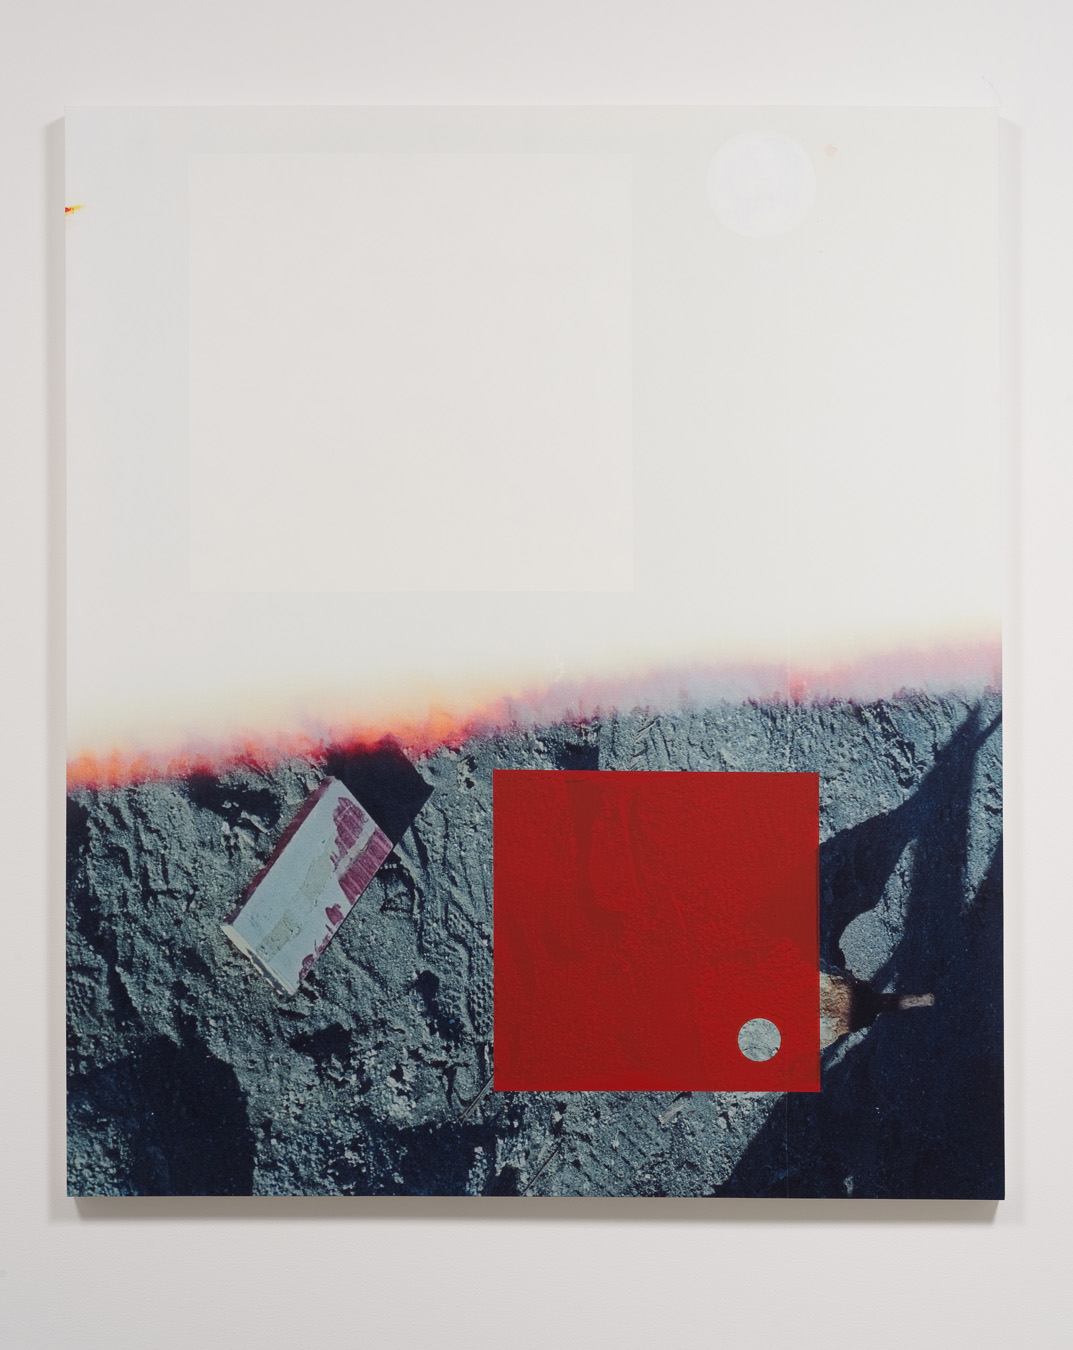  Salton Sea (half ground), 2012  Acrylic, screen ink and UV cured ink on canvas over  panel  77 x 66 inches  195.58 x 167.64 cm       